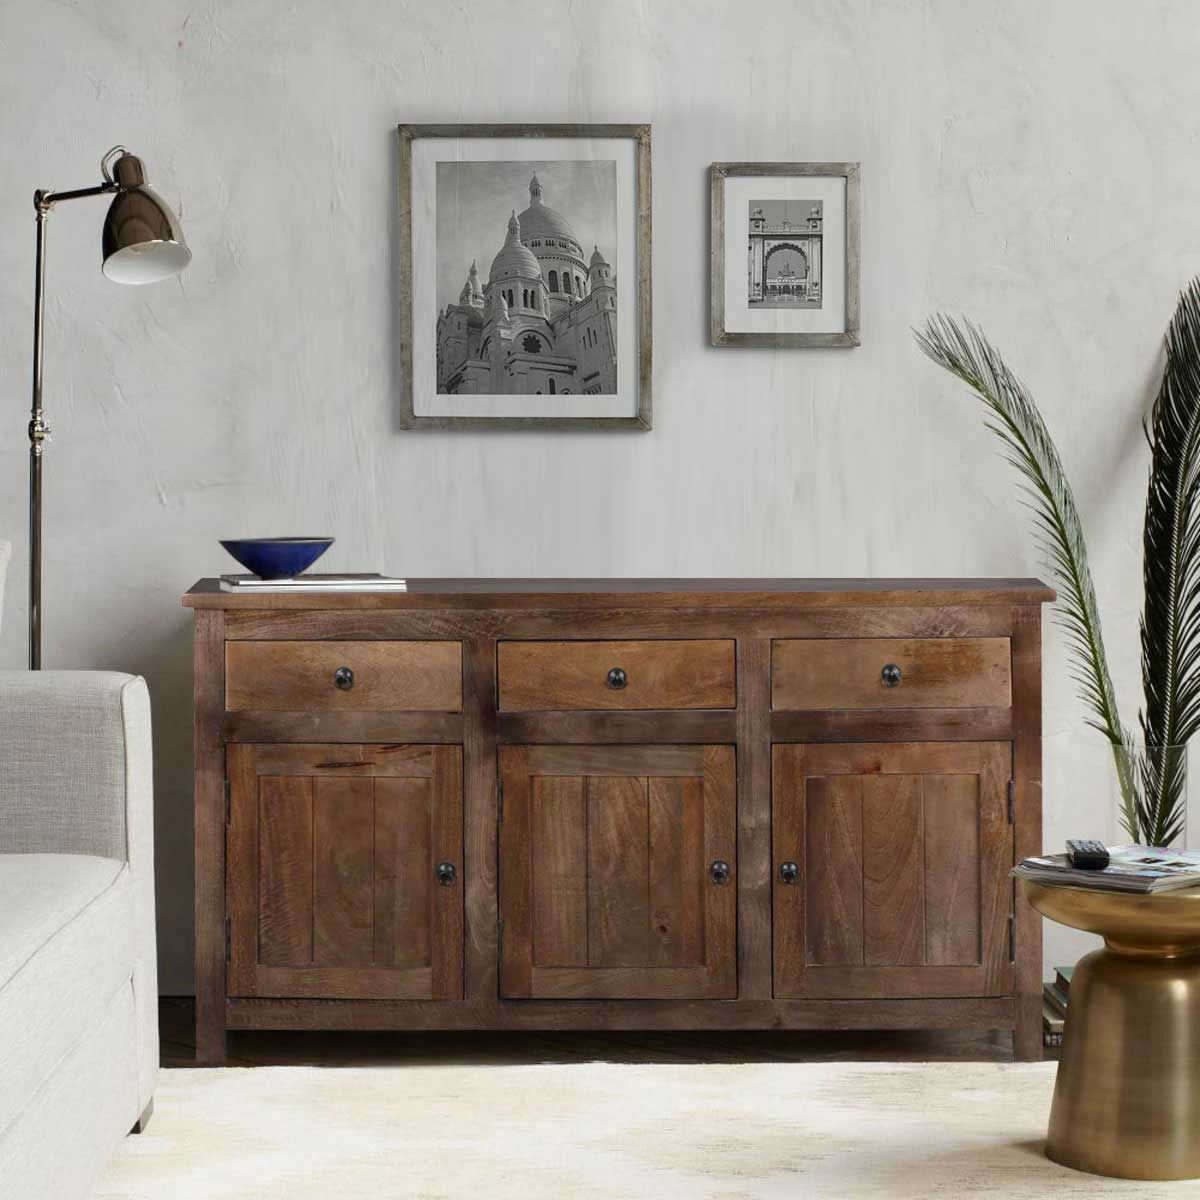 Willshire Rustic Solid Wood 3 Drawer Large Sideboard Cabinet Regarding Latest 3 Drawers Sideboards Storage Cabinet (View 11 of 15)